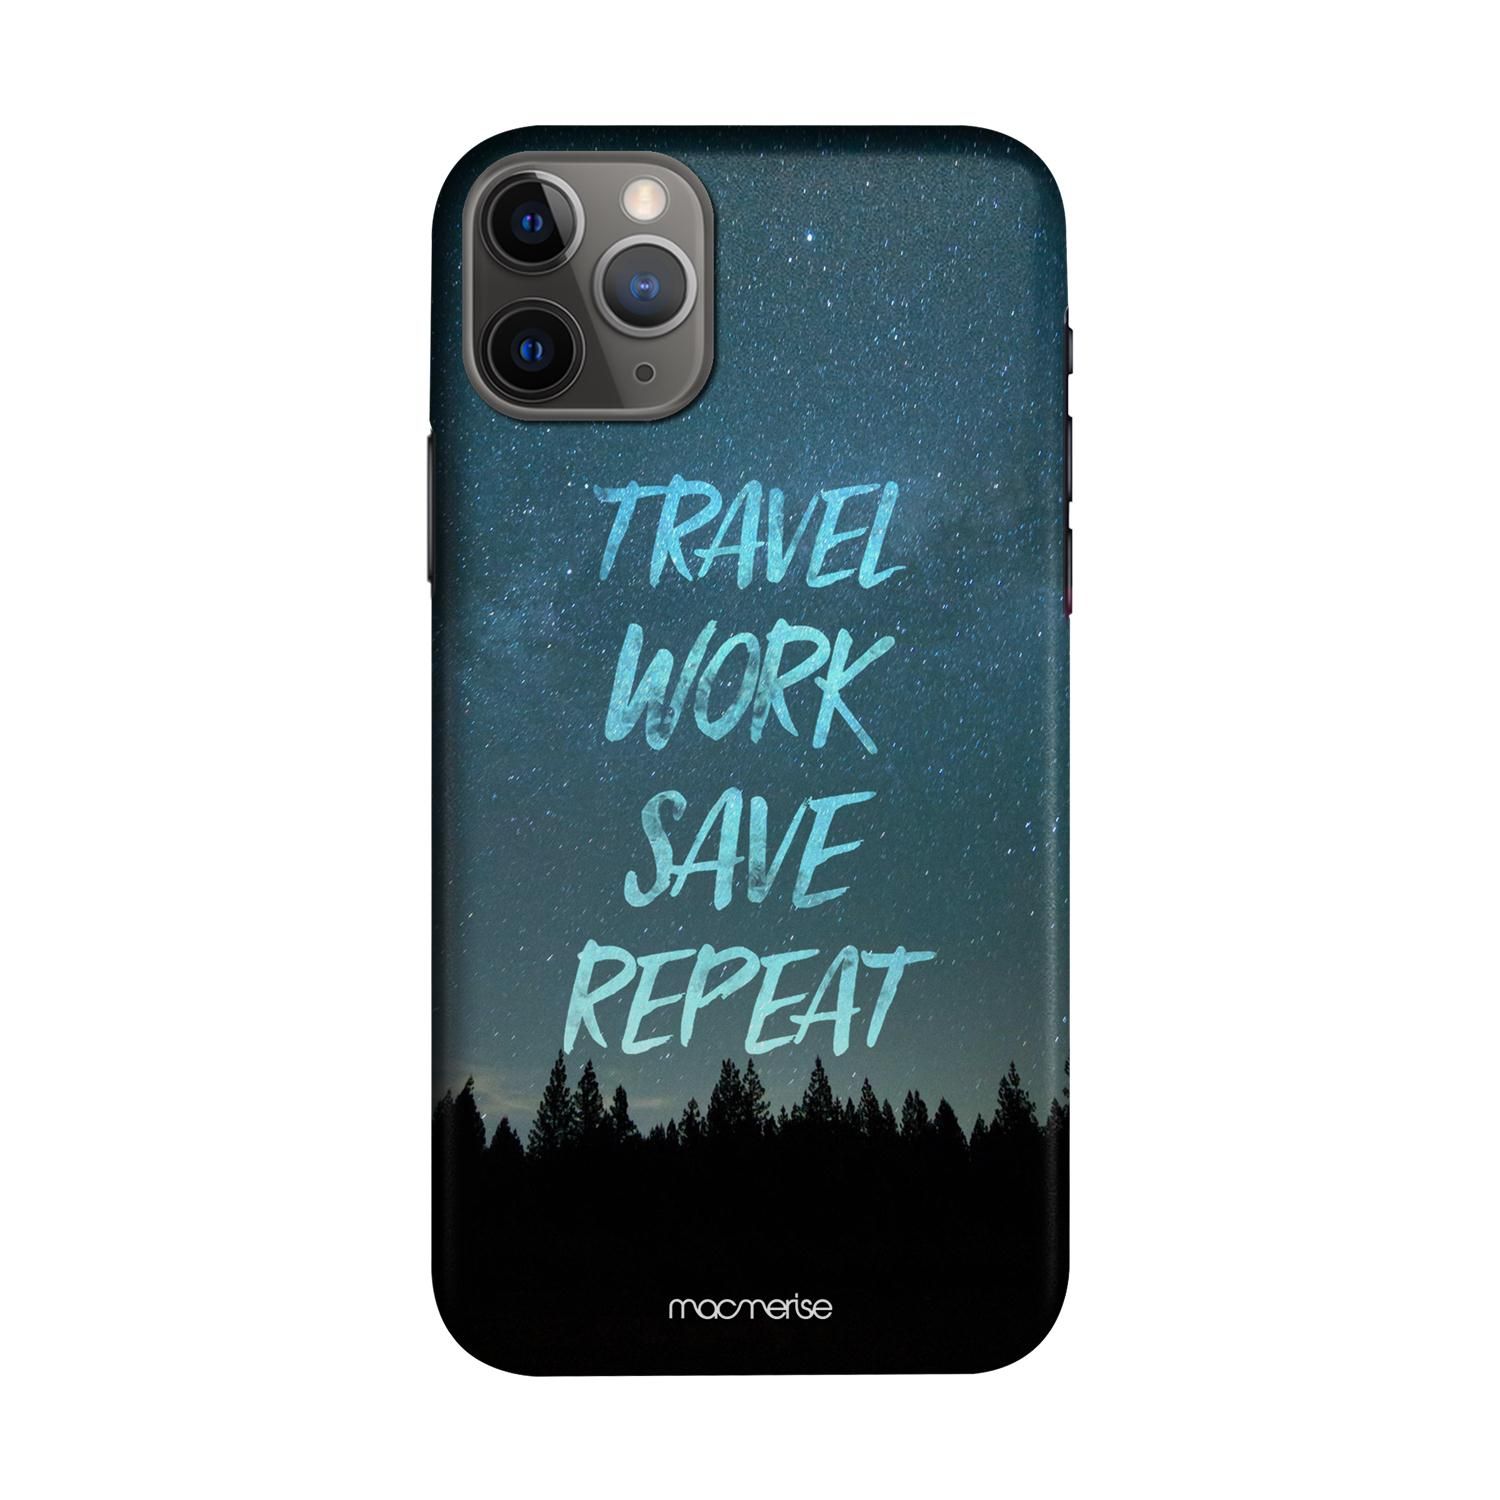 Buy Travel Work Save Repeat - Sleek Phone Case for iPhone 11 Pro Max Online